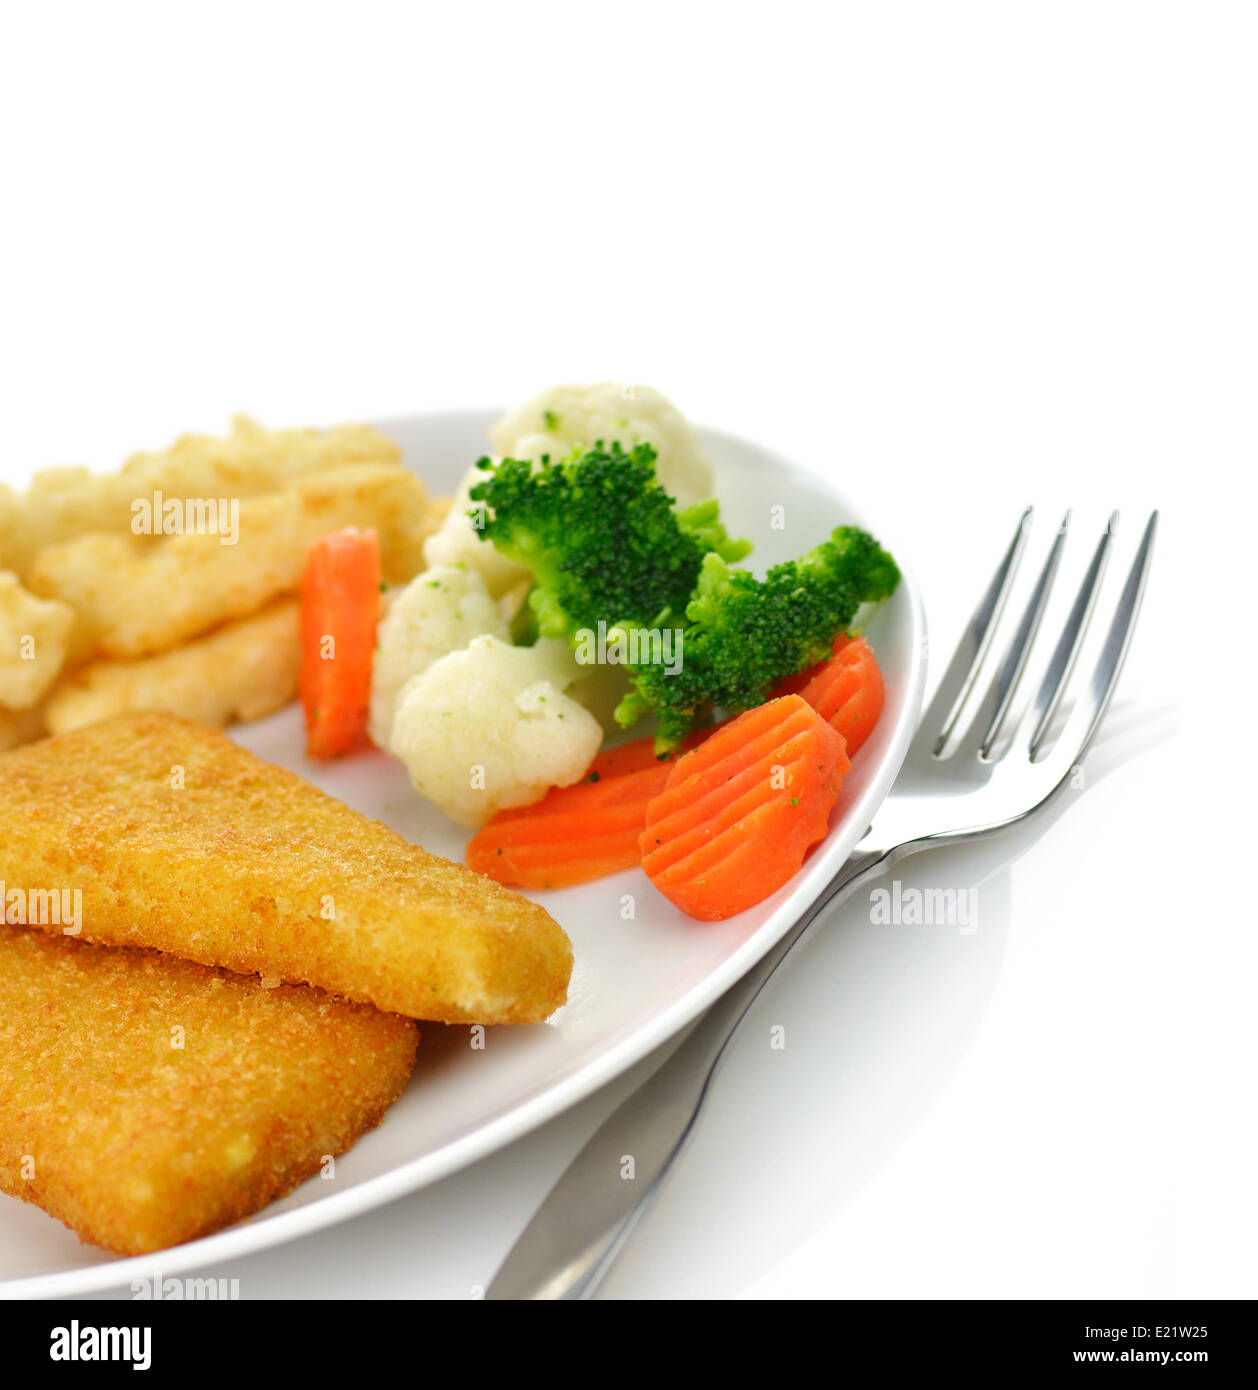 fish fillets with fried potato and vegetables Stock Photo